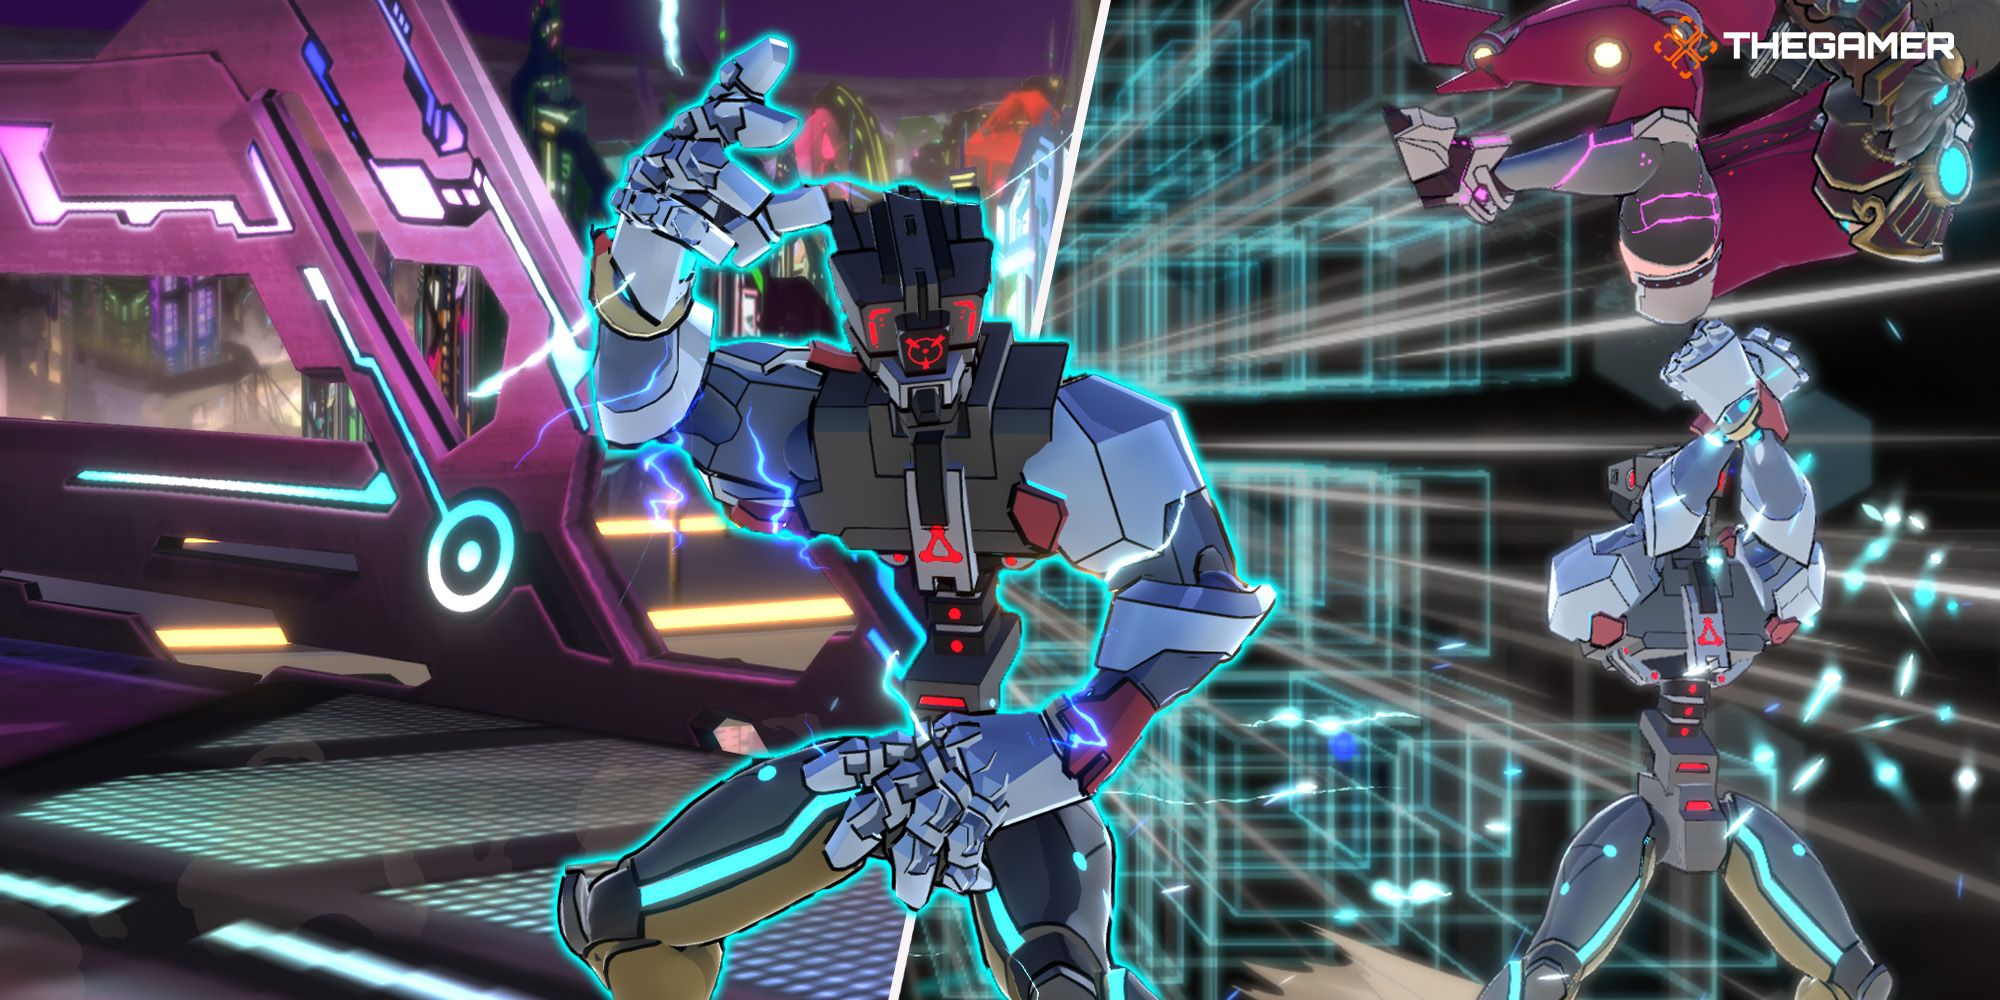 [Panel 1] A futuristic cityscape. [Panel 2] An Attack Mode Alpha Gear launches an opponent in the air with a super combo. [Forefront] A Combat Mode Alpha Gear prepares to fight. All images from Fight Of Steel.